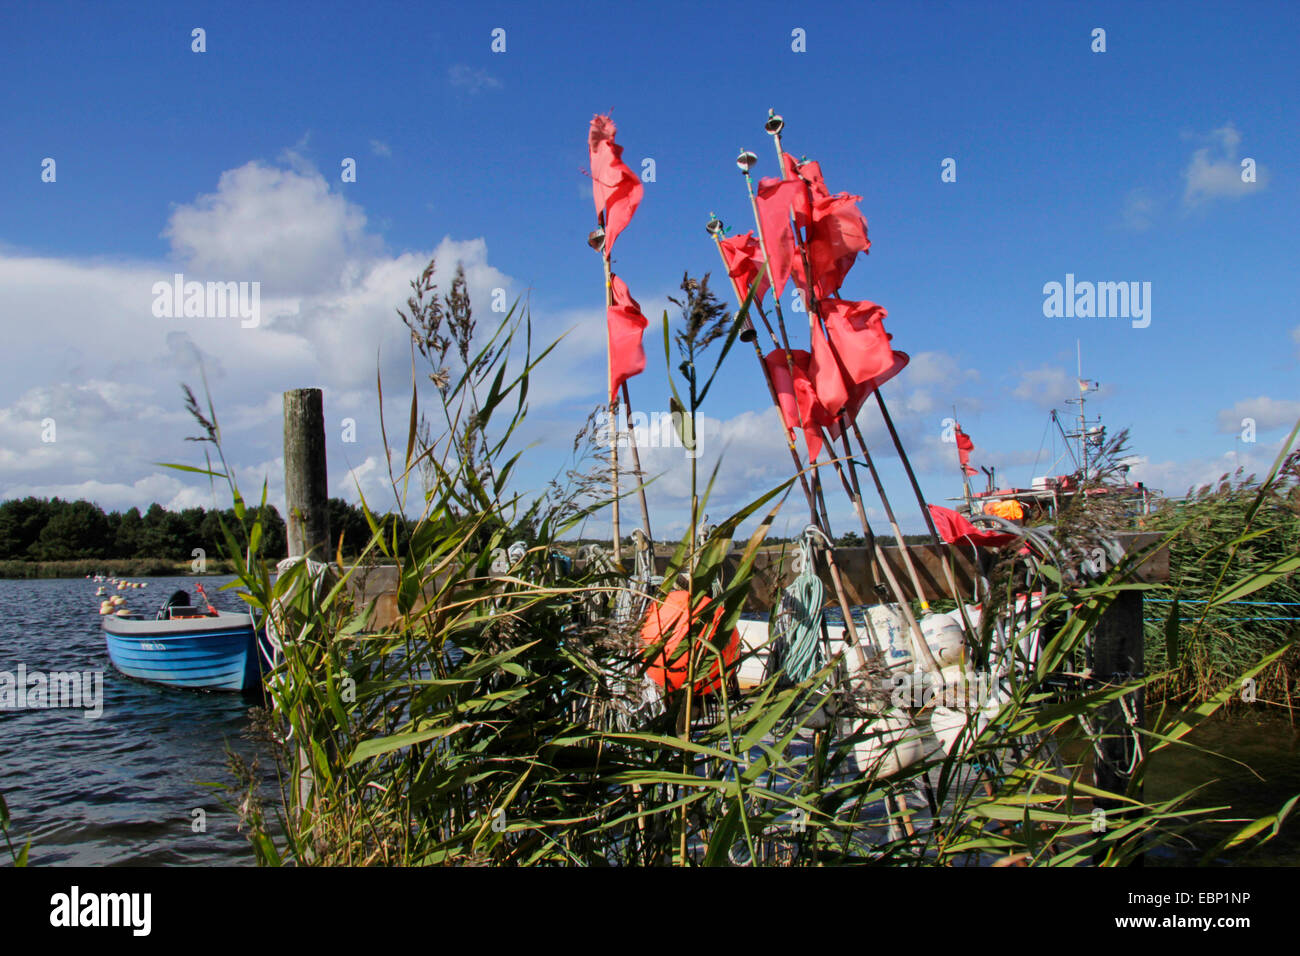 fishing boat, buoys and red flags for fishing nets in idyllic port of Darss, Germany, Mecklenburg-Western Pomerania, Prerow Stock Photo